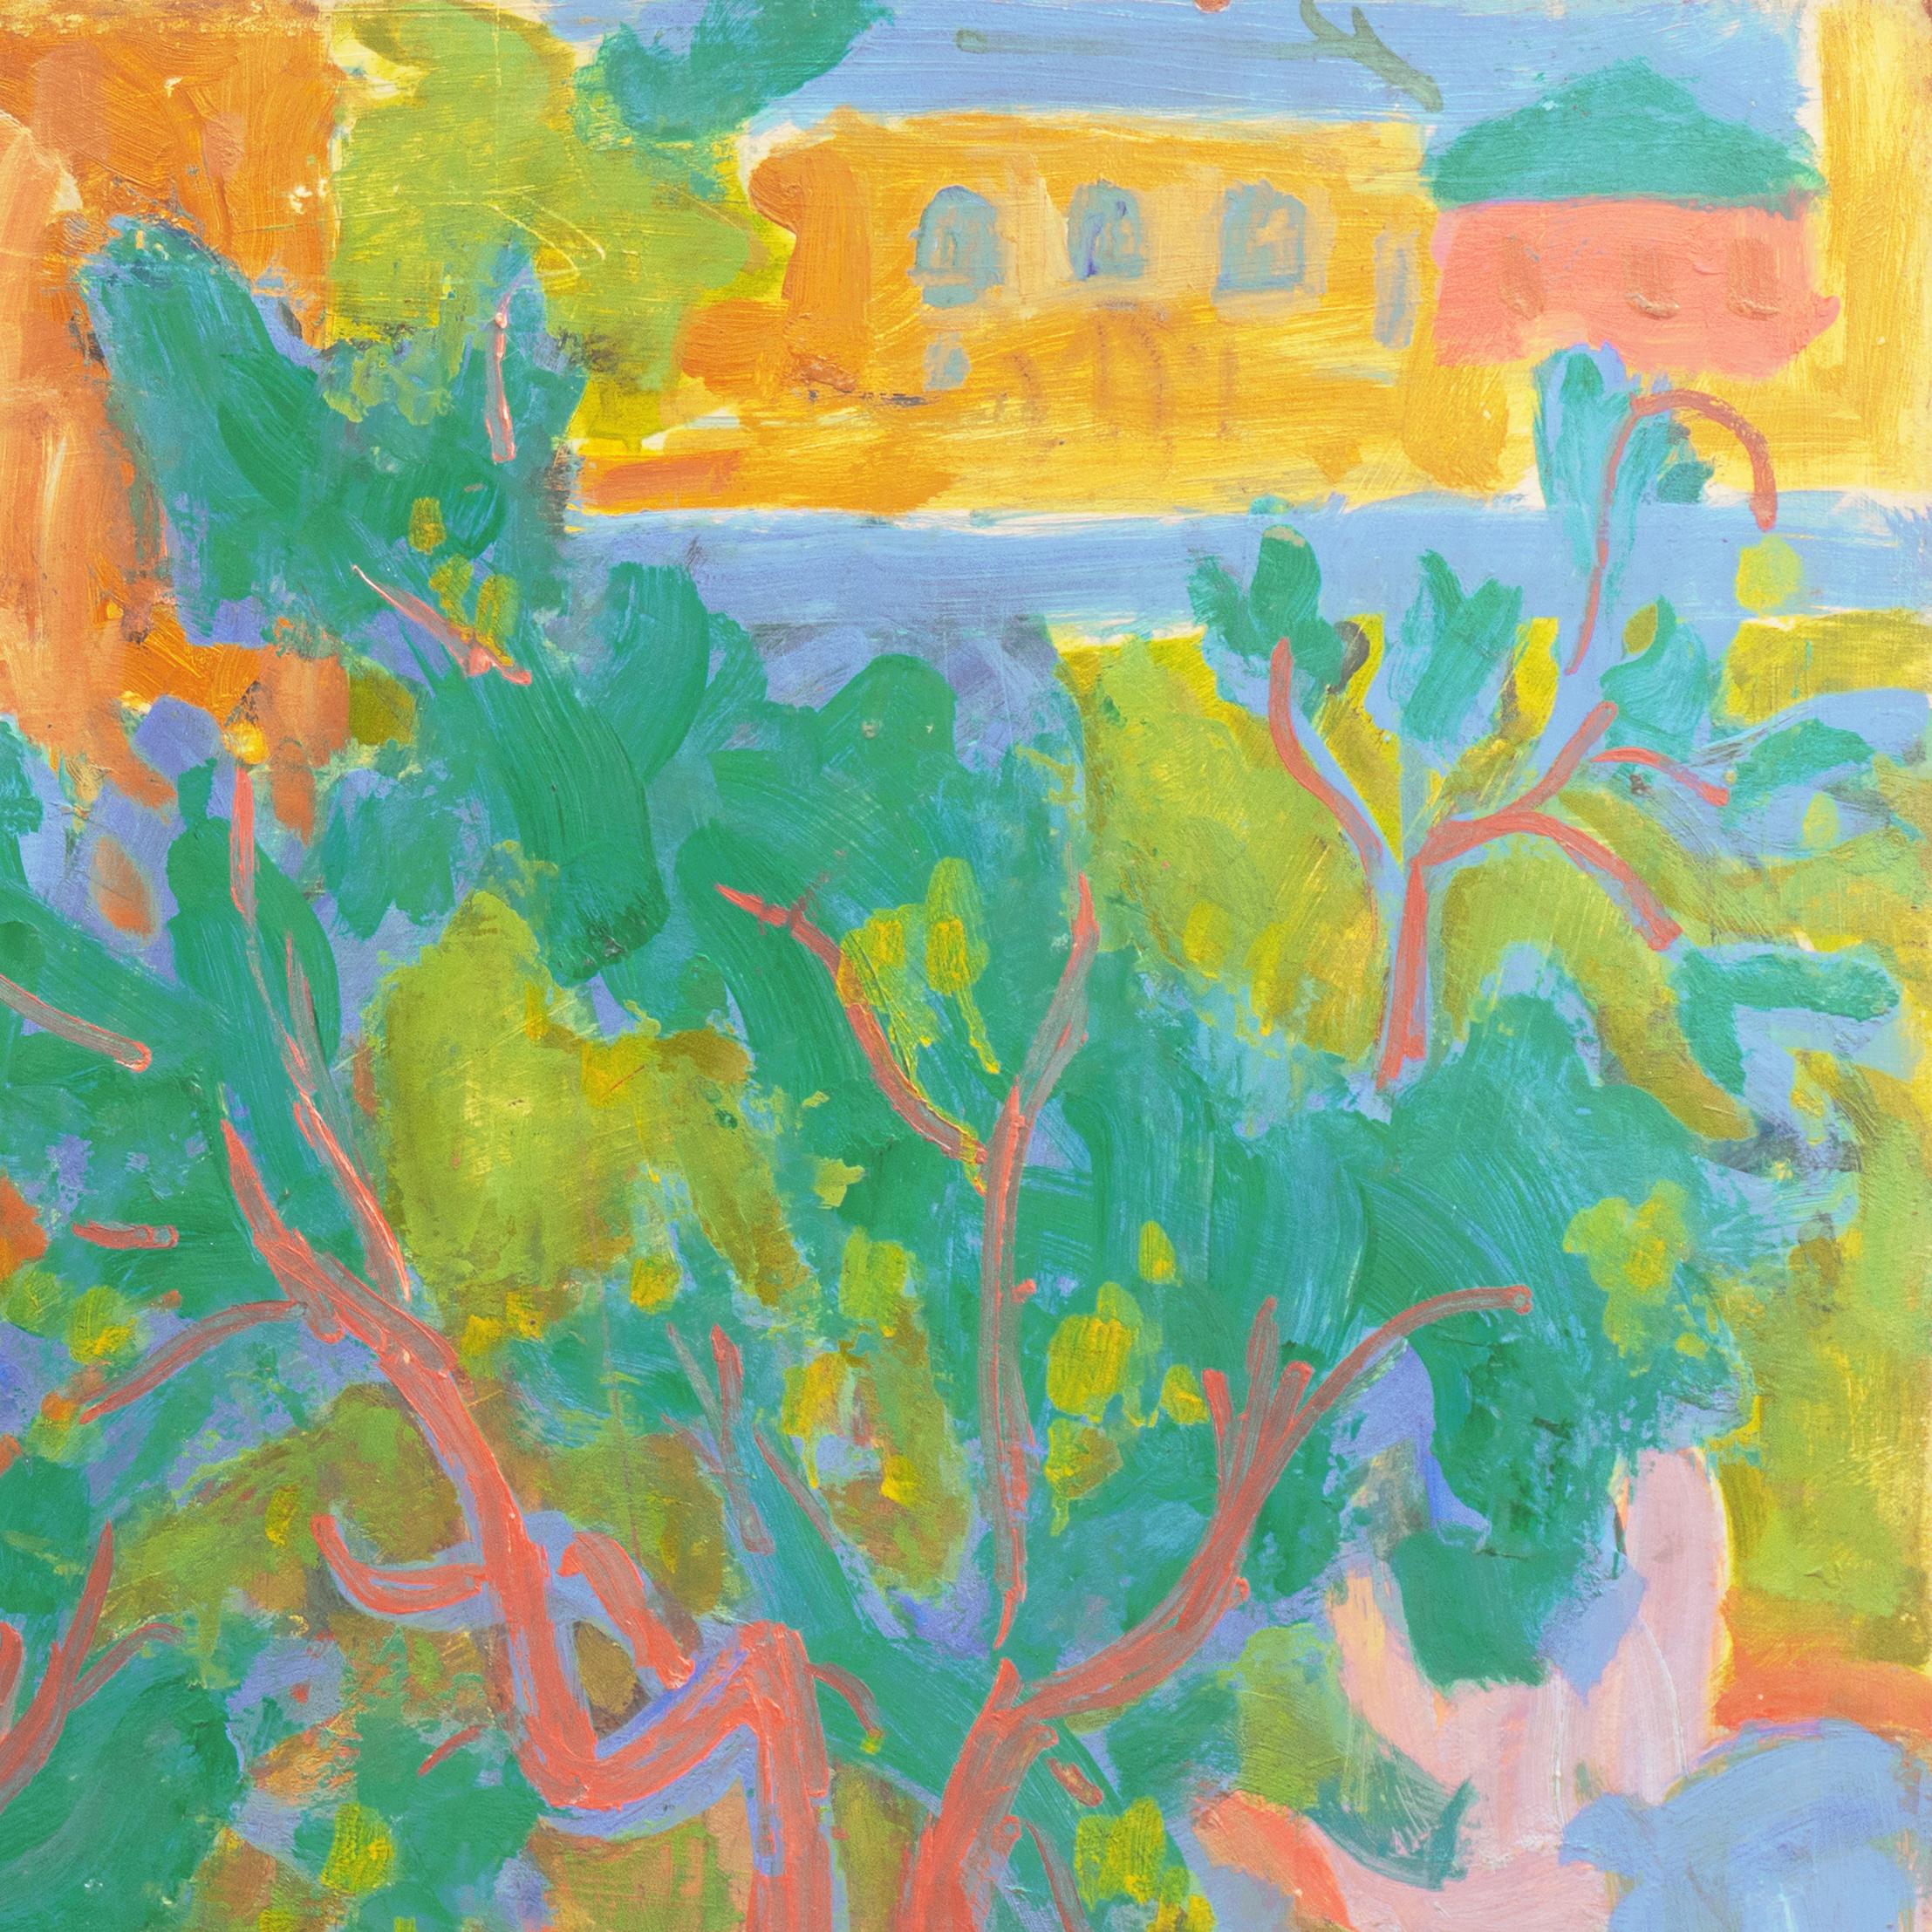 Signed lower right, 'Di Gesu' for Victor Di Gesu (American, 1914-1988) and dated 1964.

A large, mid-century oil townscape showing a view of the old town of Carmel, California, with a grove of lemon trees in the foreground framed by picturesque